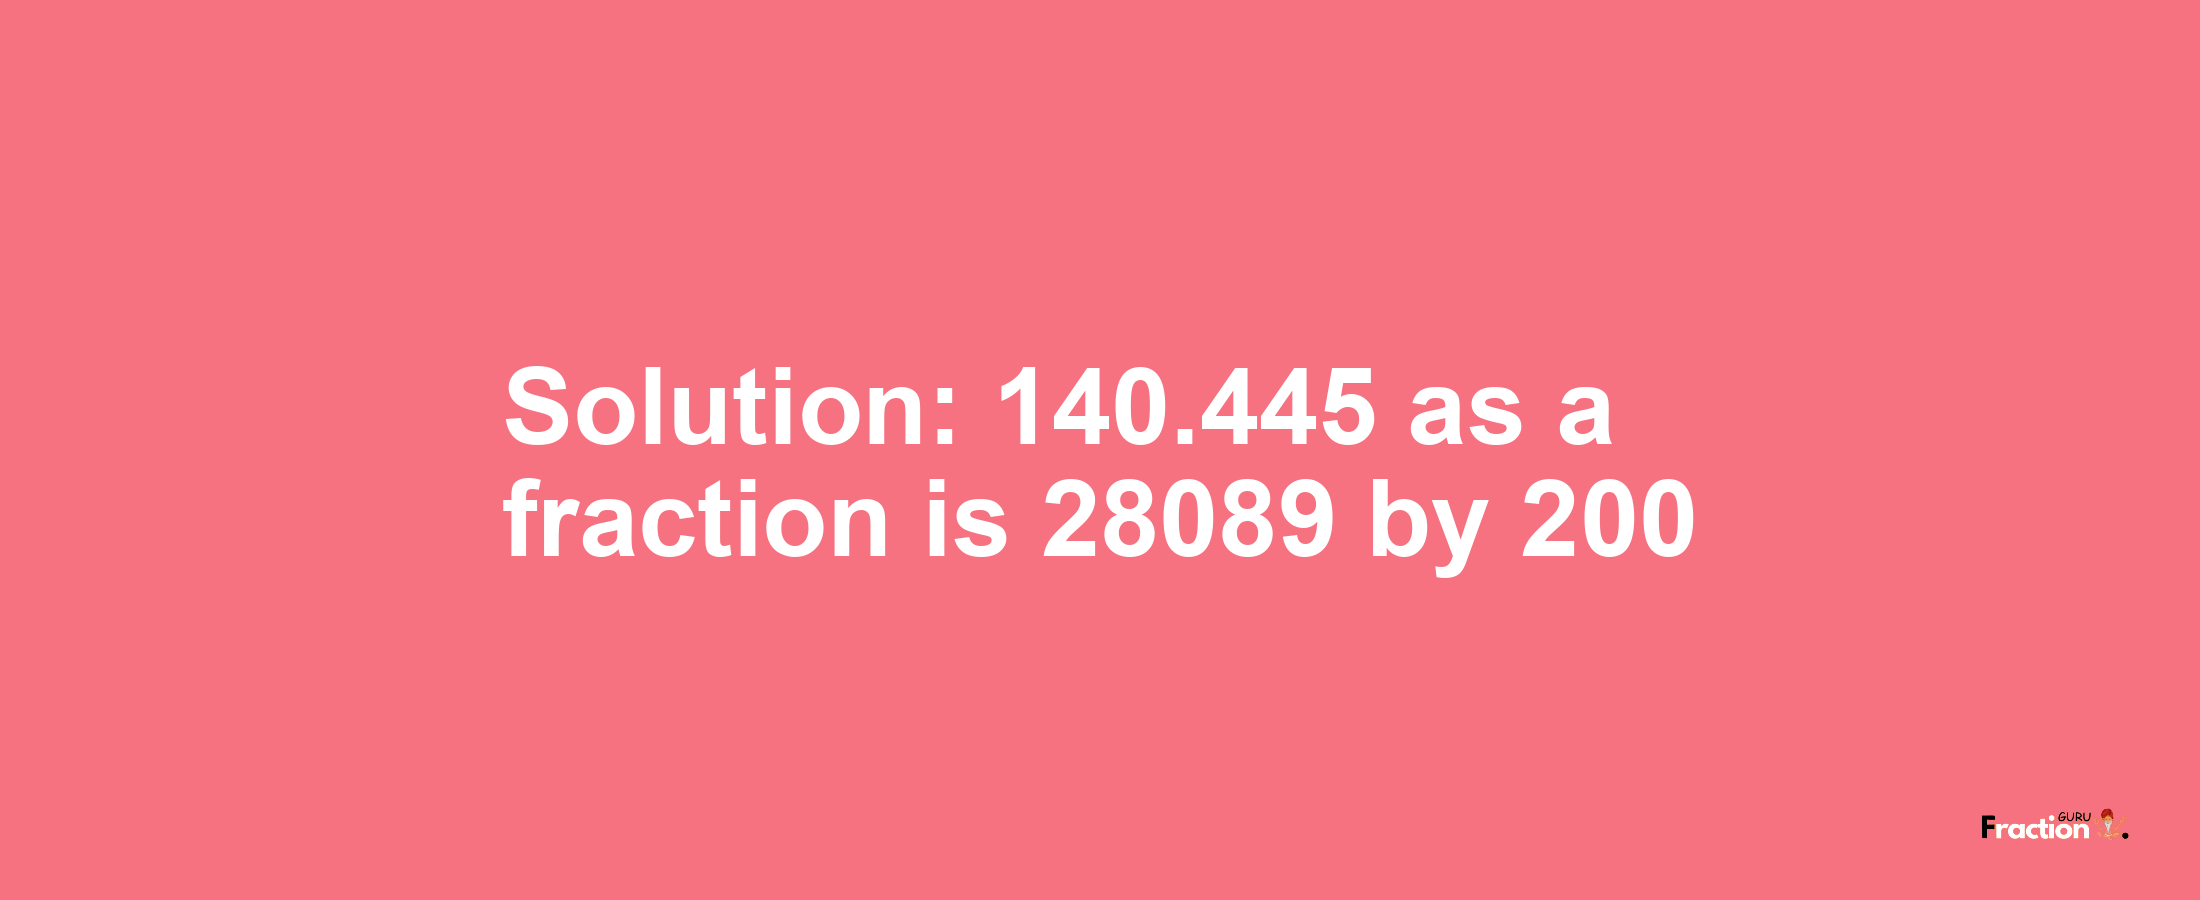 Solution:140.445 as a fraction is 28089/200